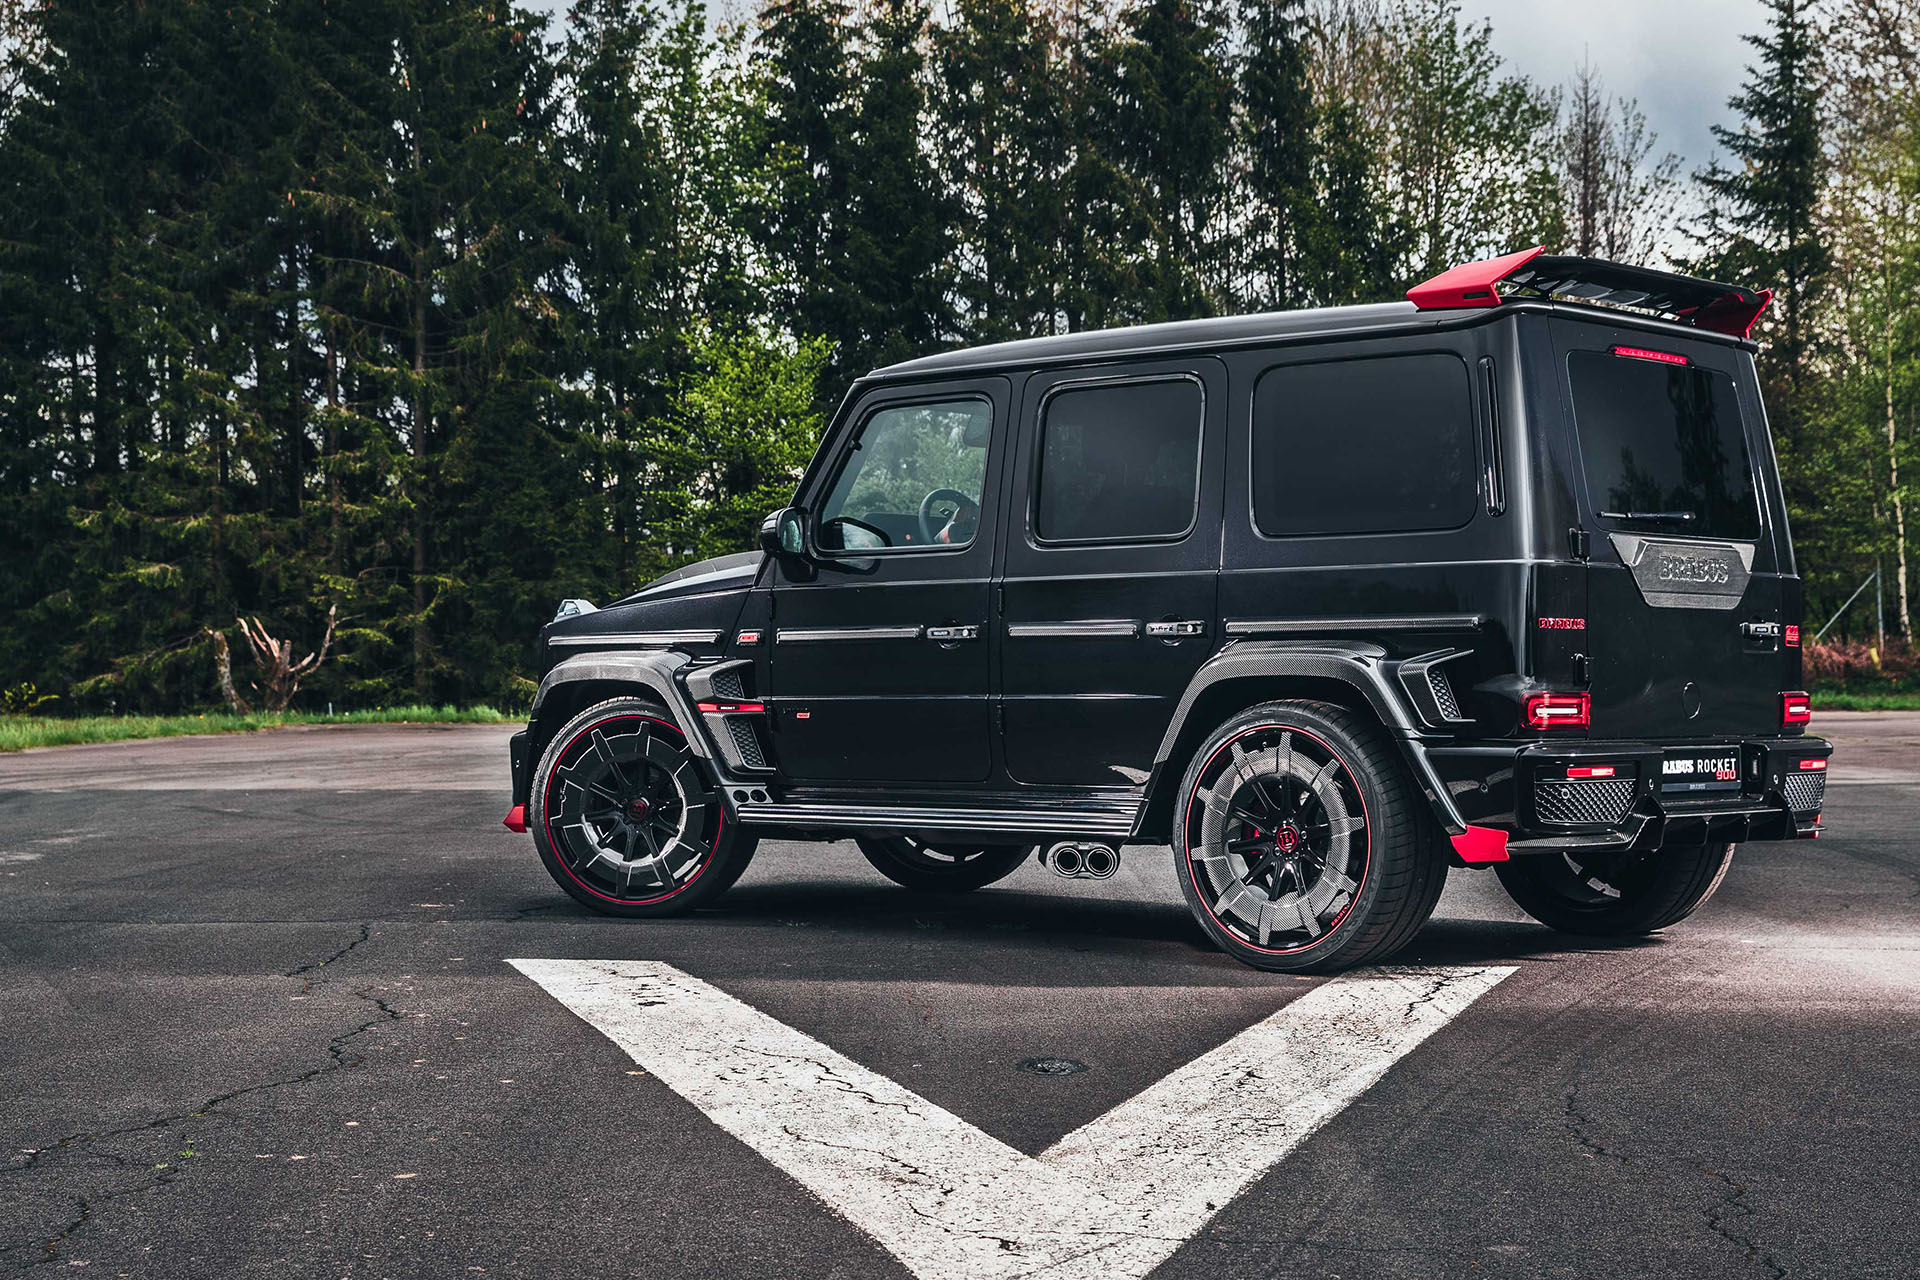 Brabus Rocket 900: A $600k G63 AMG Limited to 25 Cars Worldwide